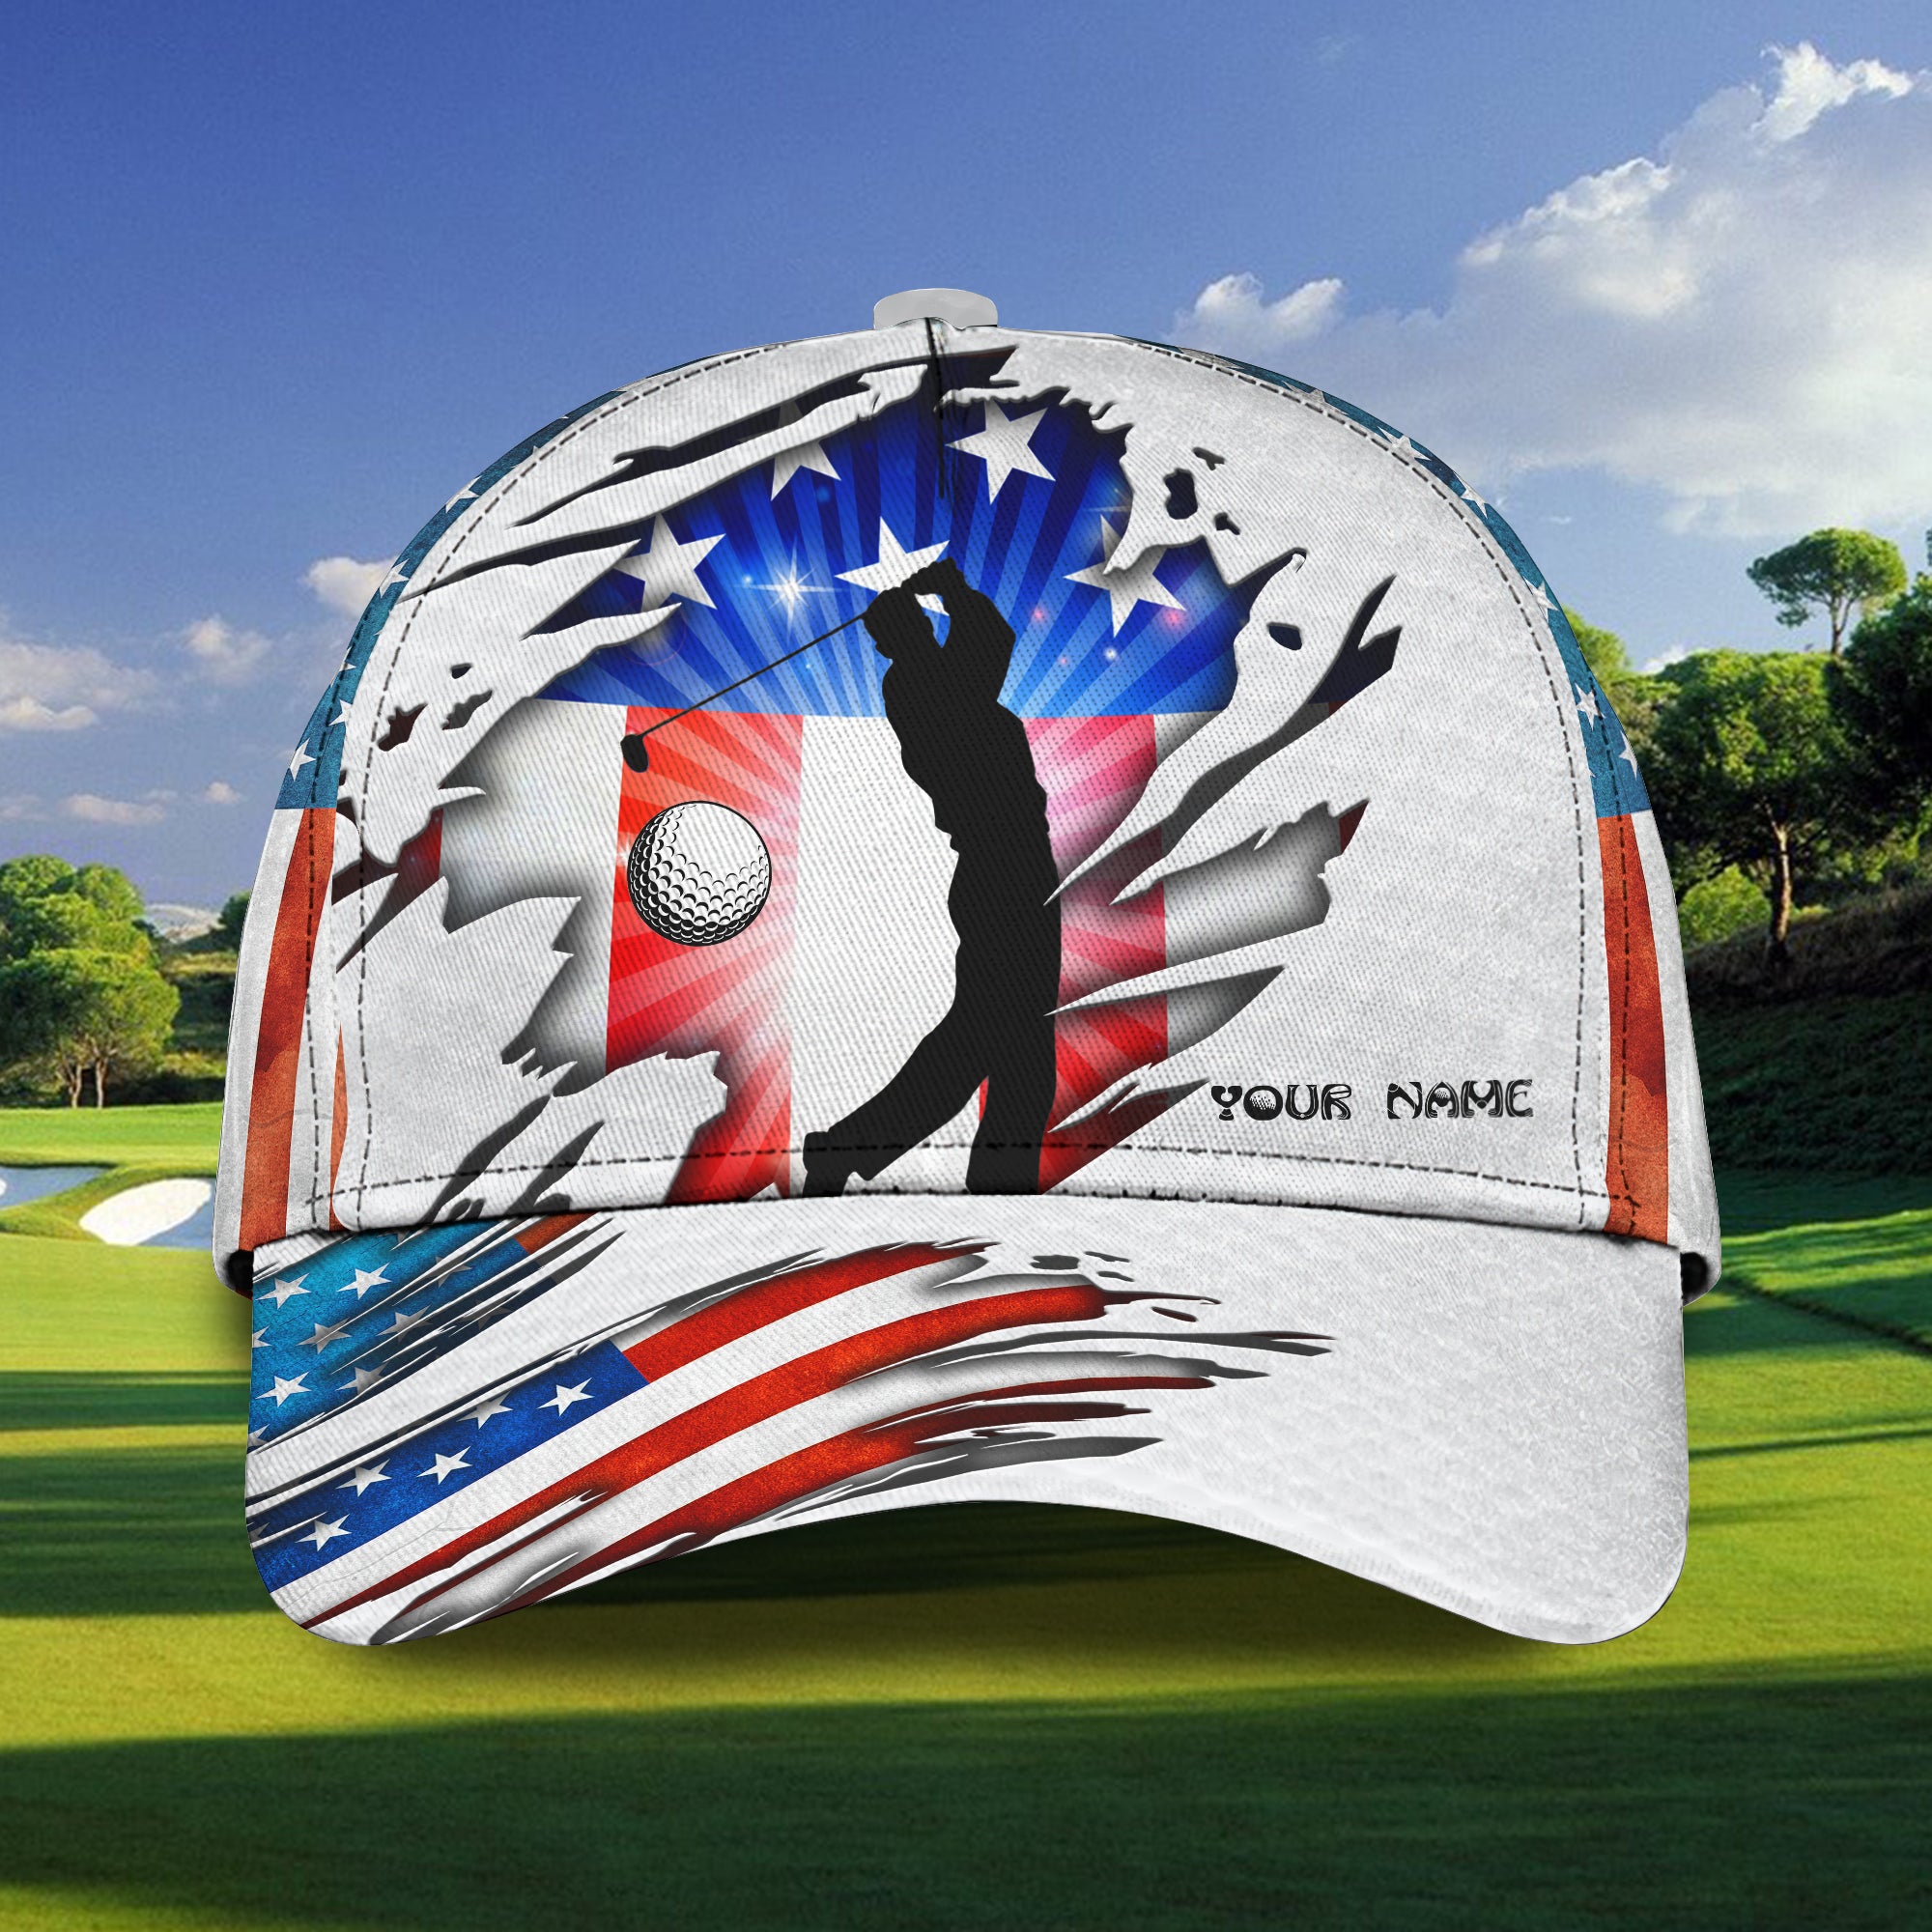 Golf - Personalized Name Cap - Tt99-110- free shipping